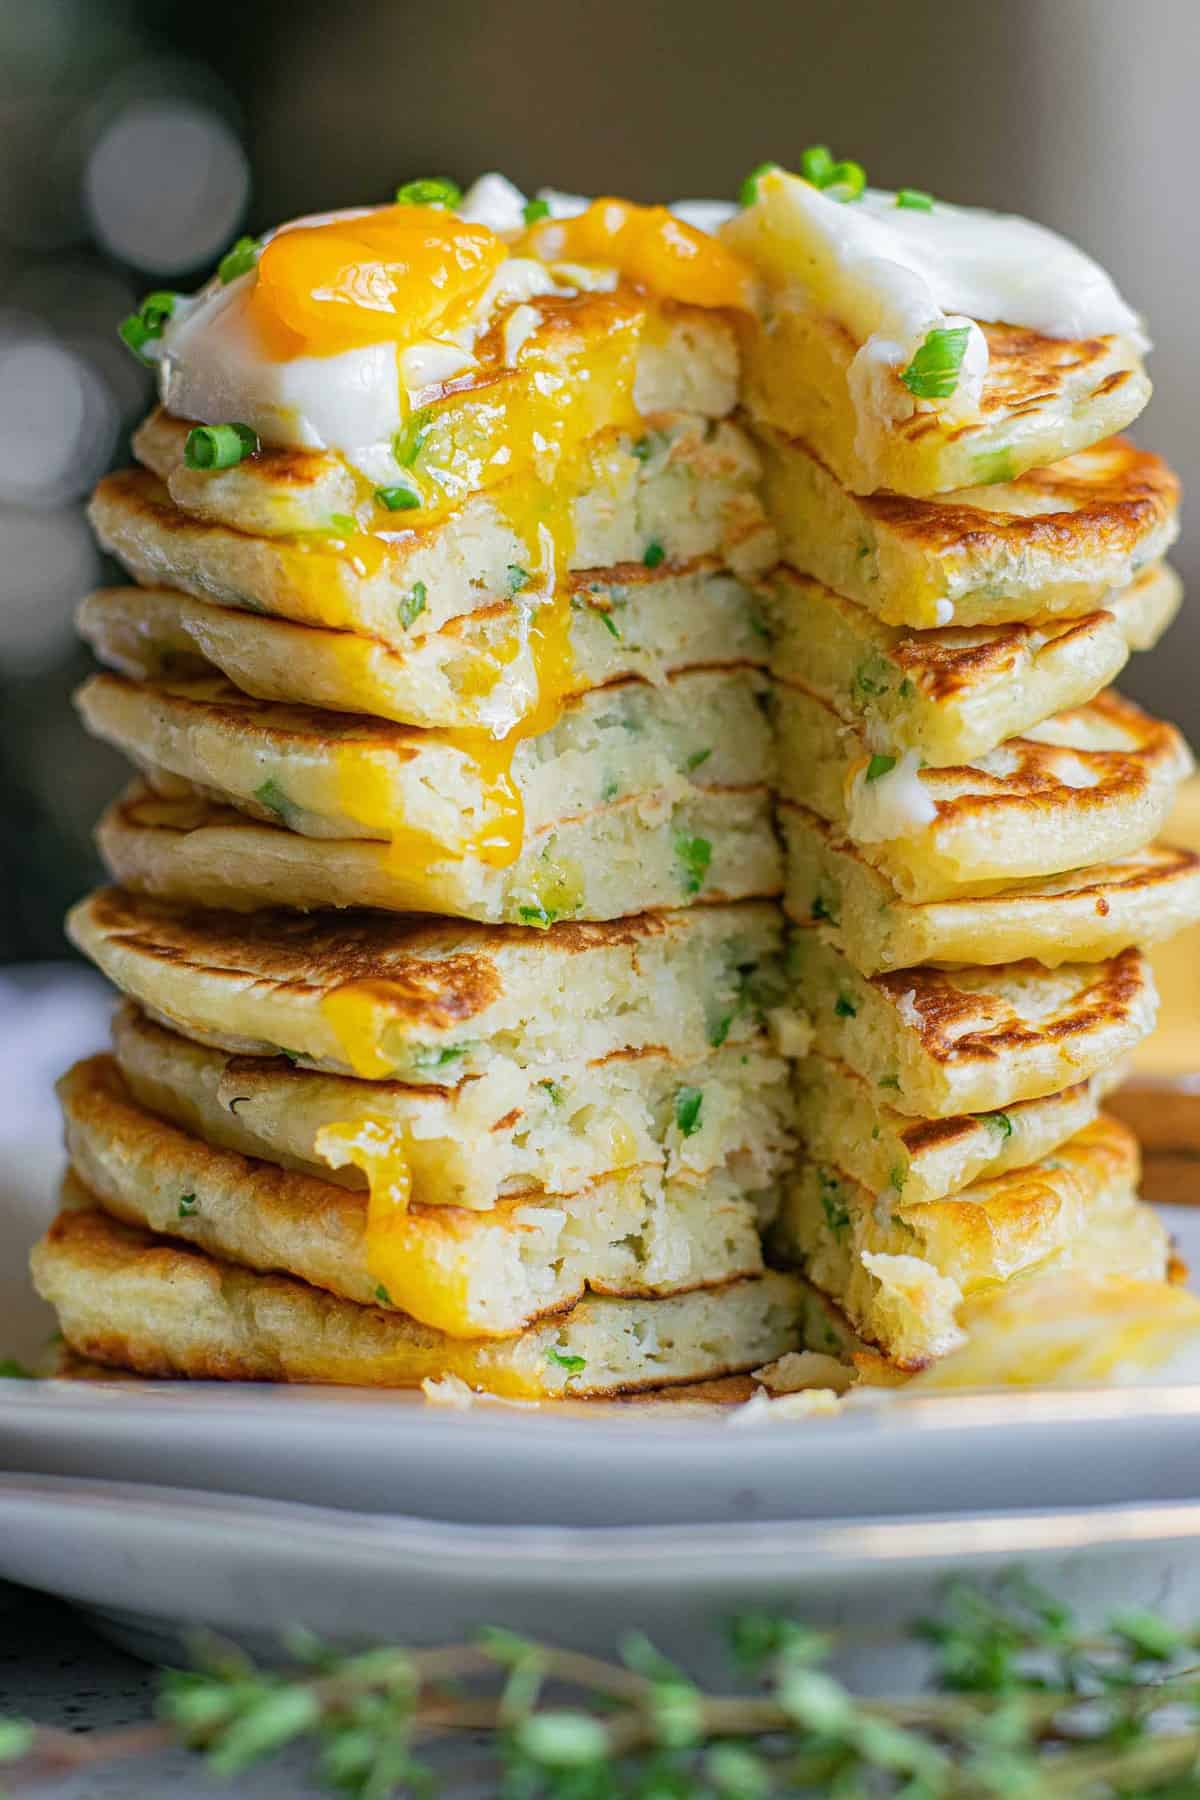 Cut stack of pancakes to show inside texture, egg on top.